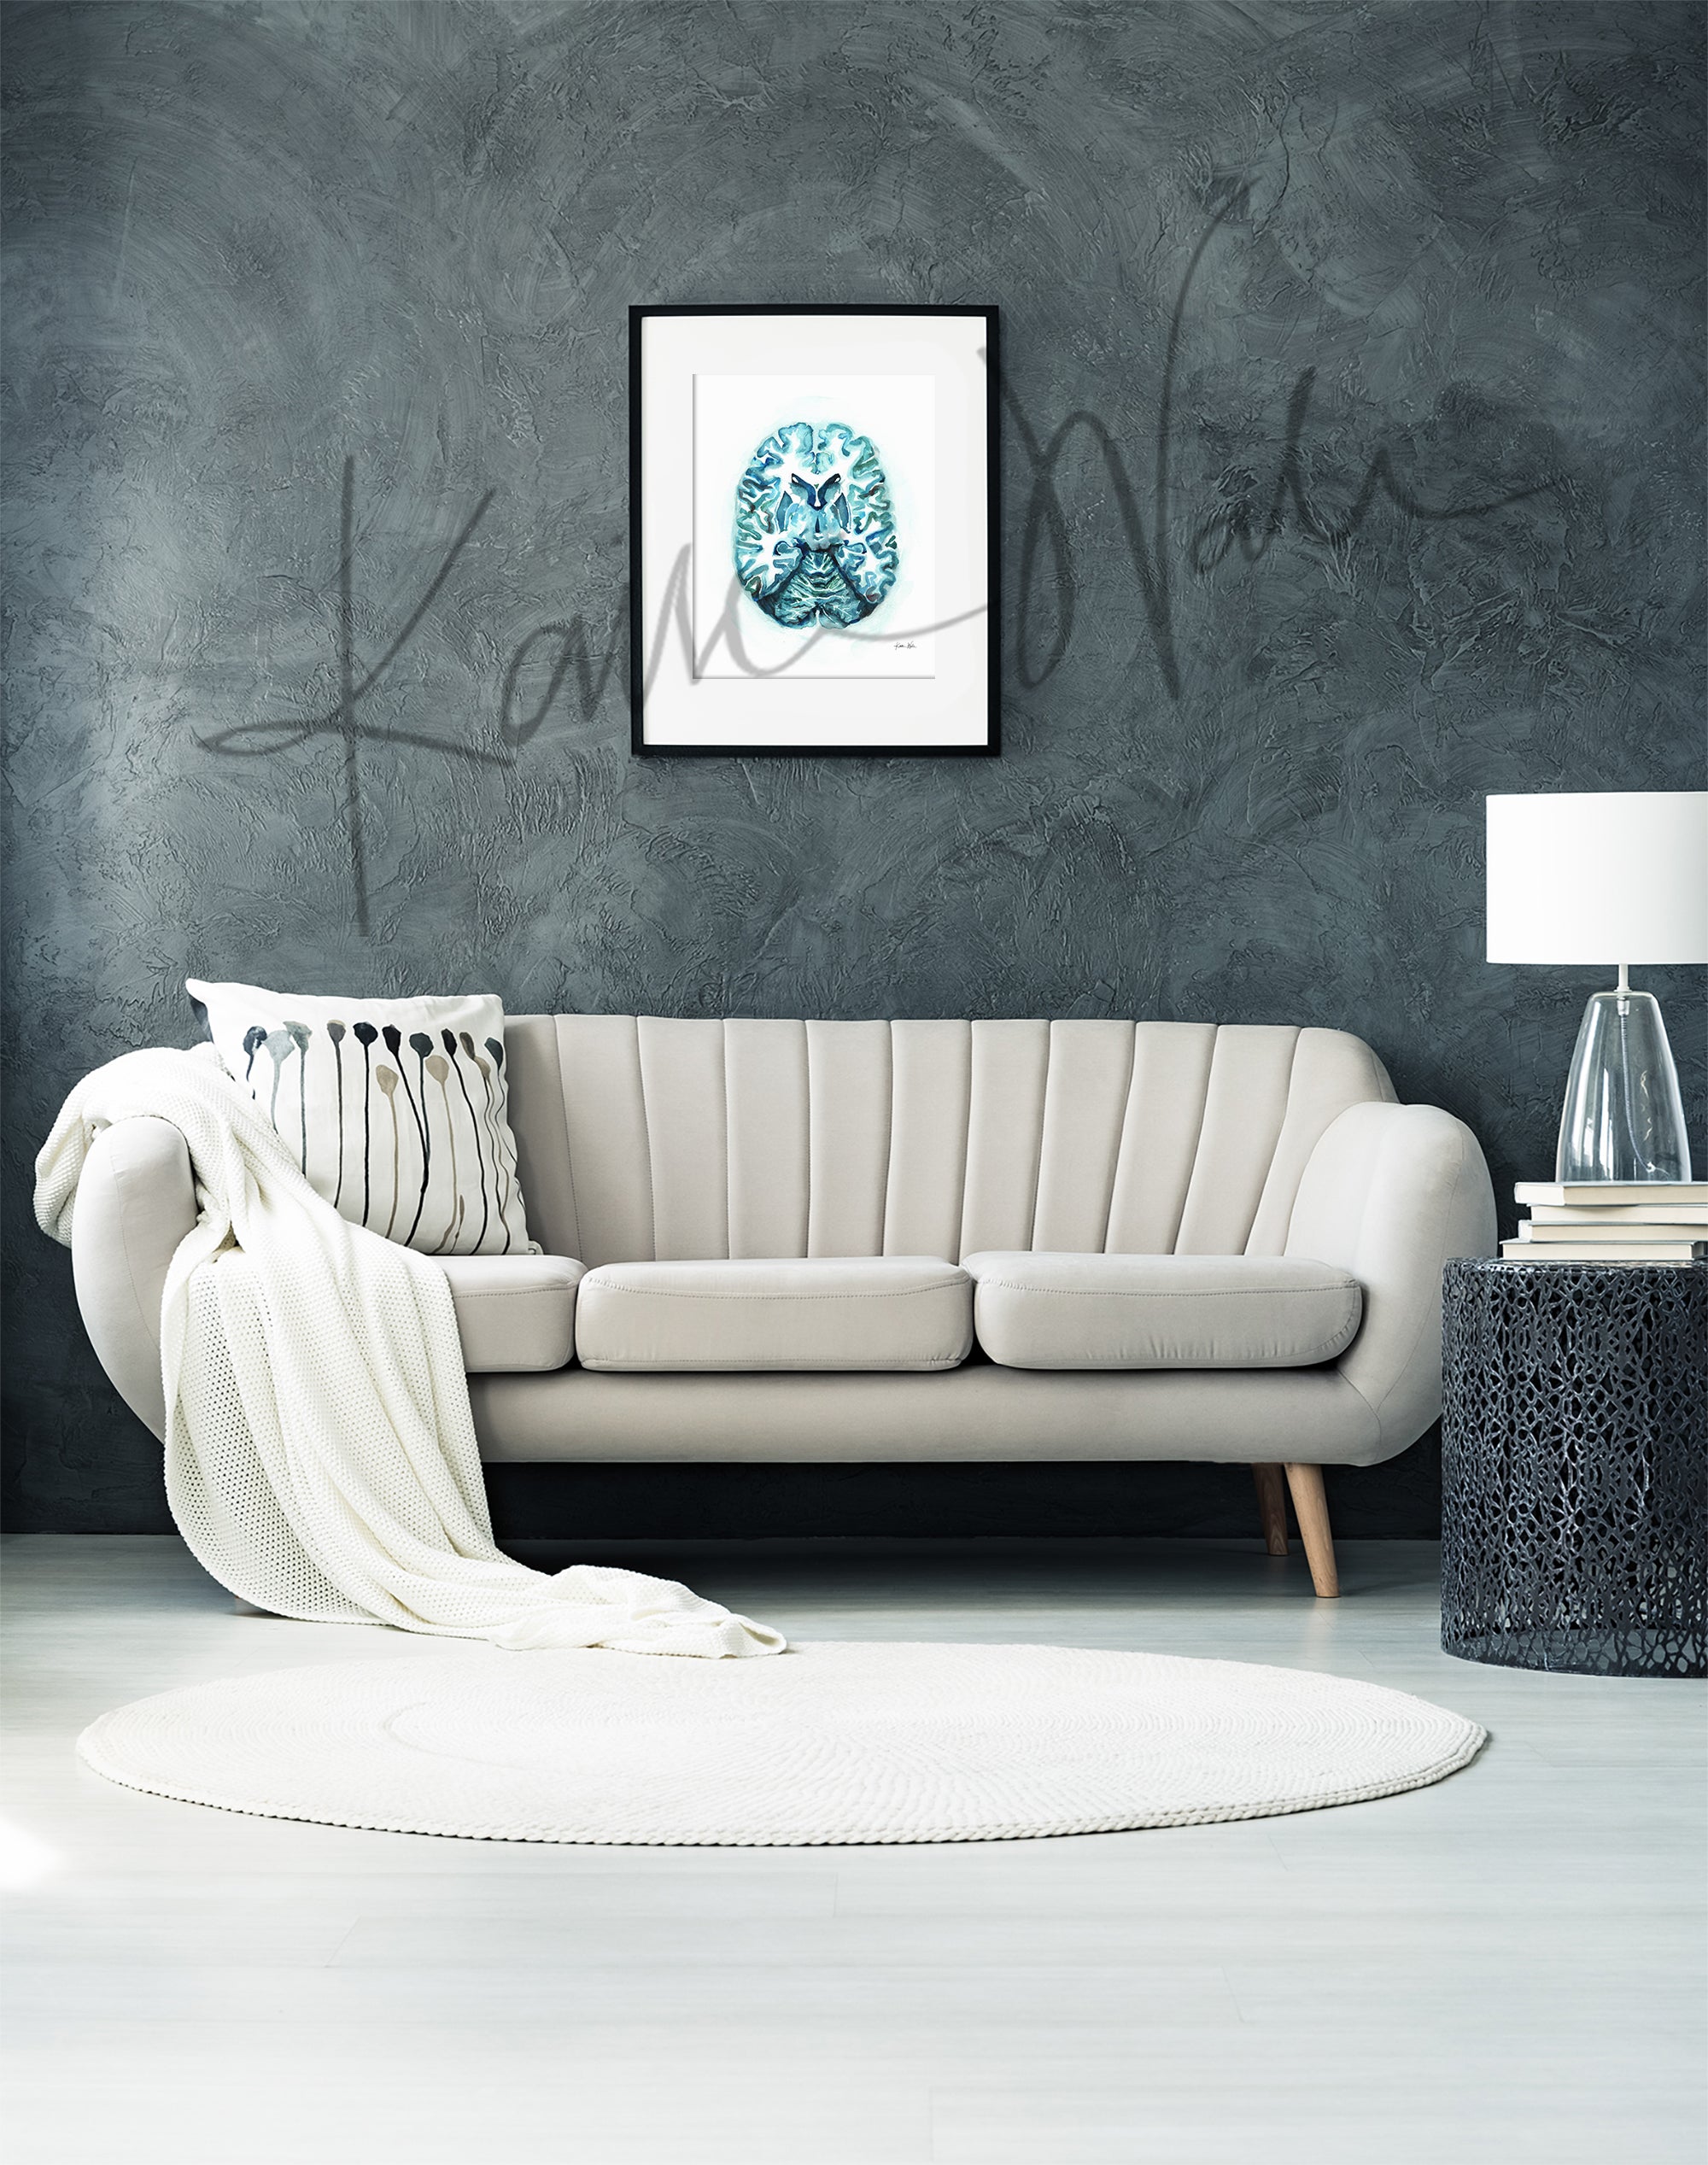 Framed watercolor painting showing a teal and blue transverse cut of the brain. The painting is hanging over a white couch.